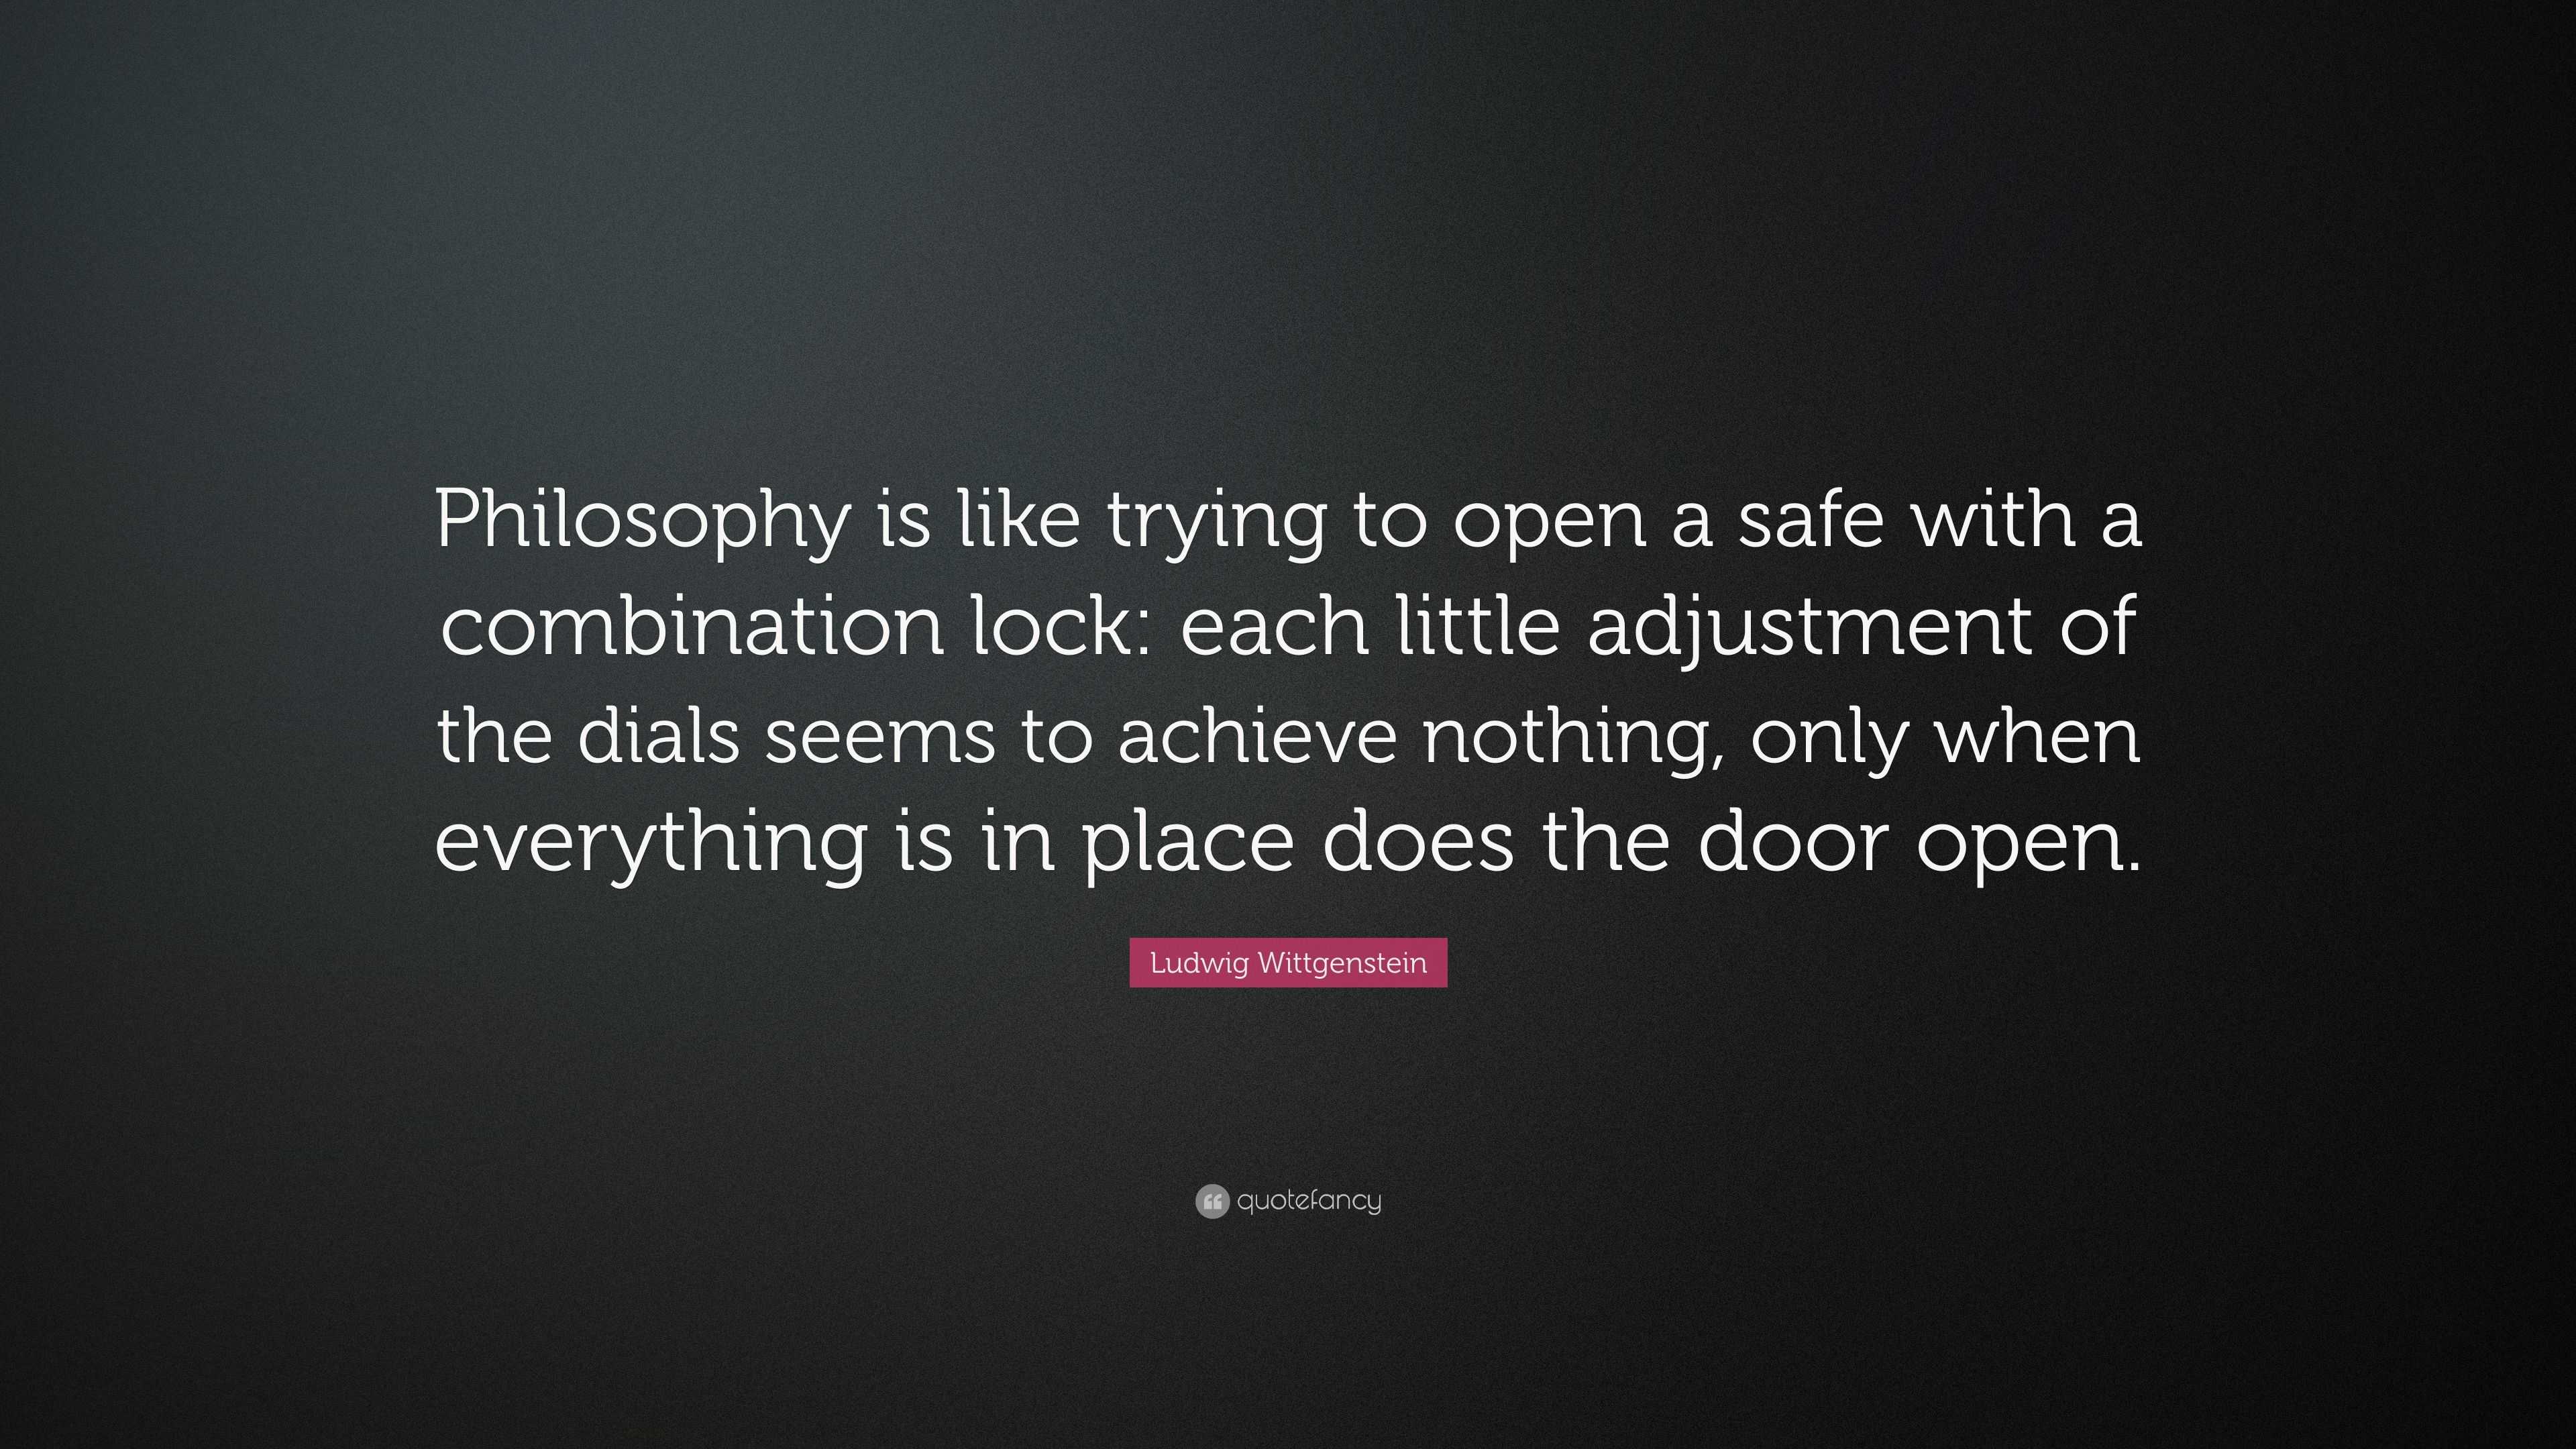 https://quotefancy.com/media/wallpaper/3840x2160/5736730-Ludwig-Wittgenstein-Quote-Philosophy-is-like-trying-to-open-a-safe.jpg